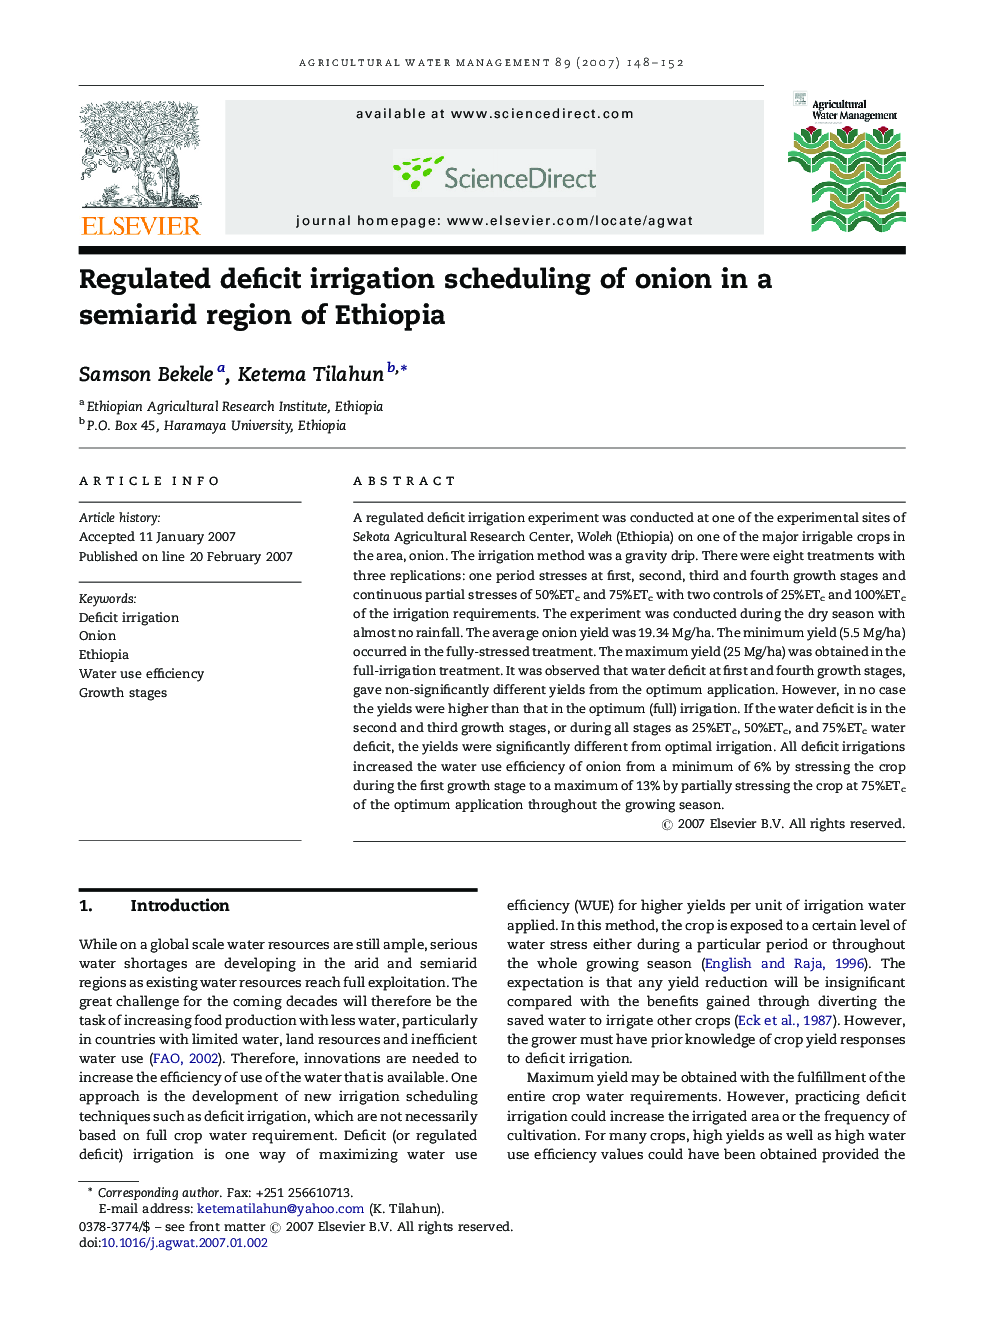 Regulated deficit irrigation scheduling of onion in a semiarid region of Ethiopia